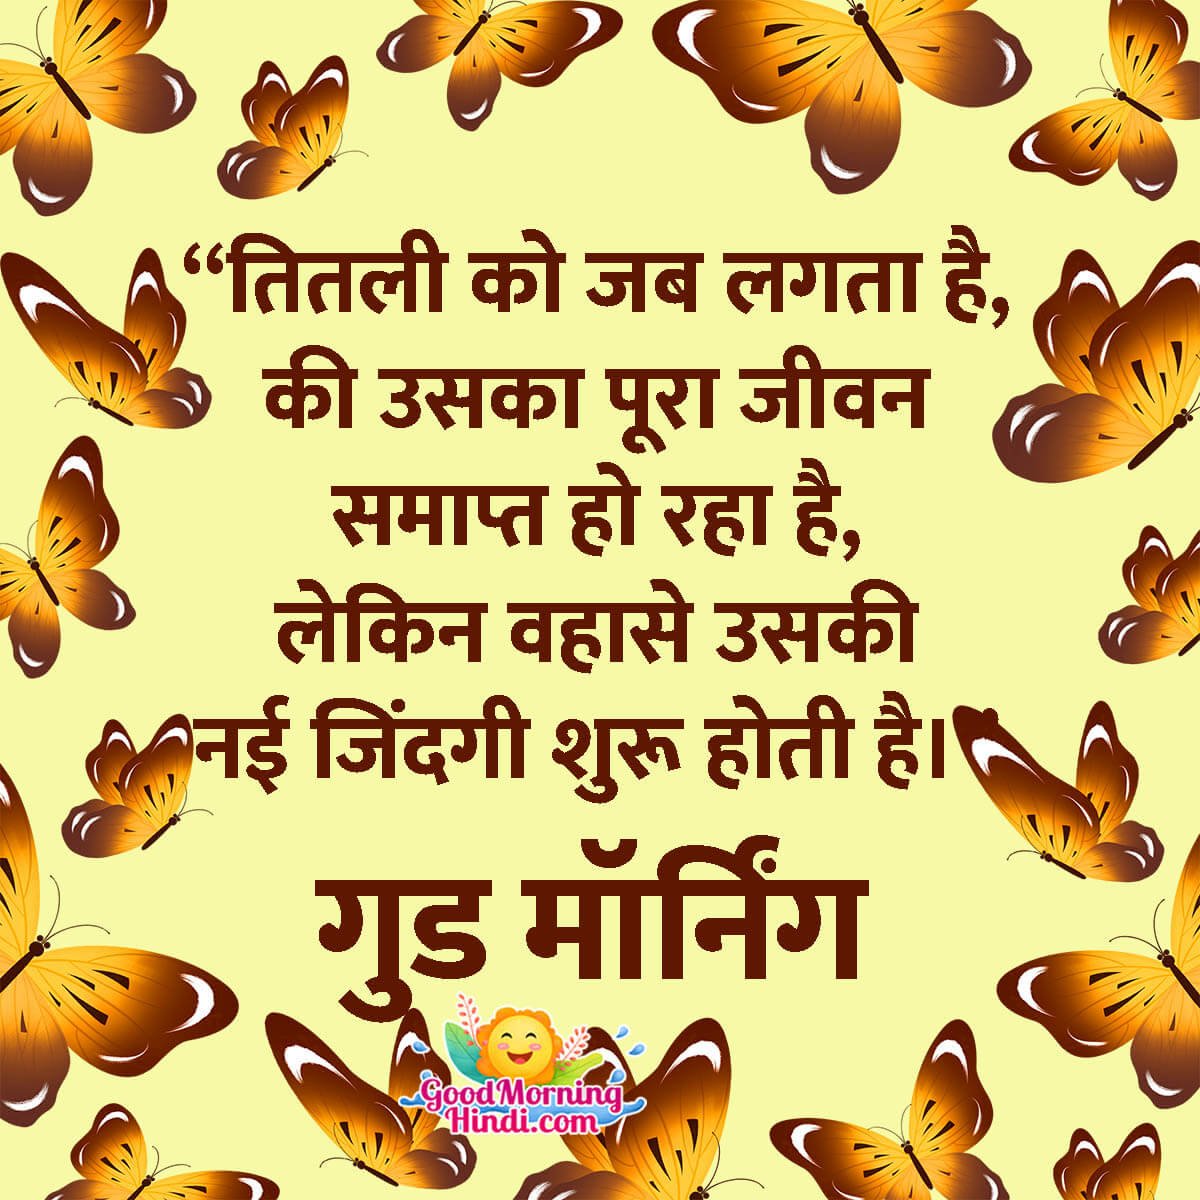 Good Morning Butterfly Quotes in Hindi - Good Morning Wishes ...